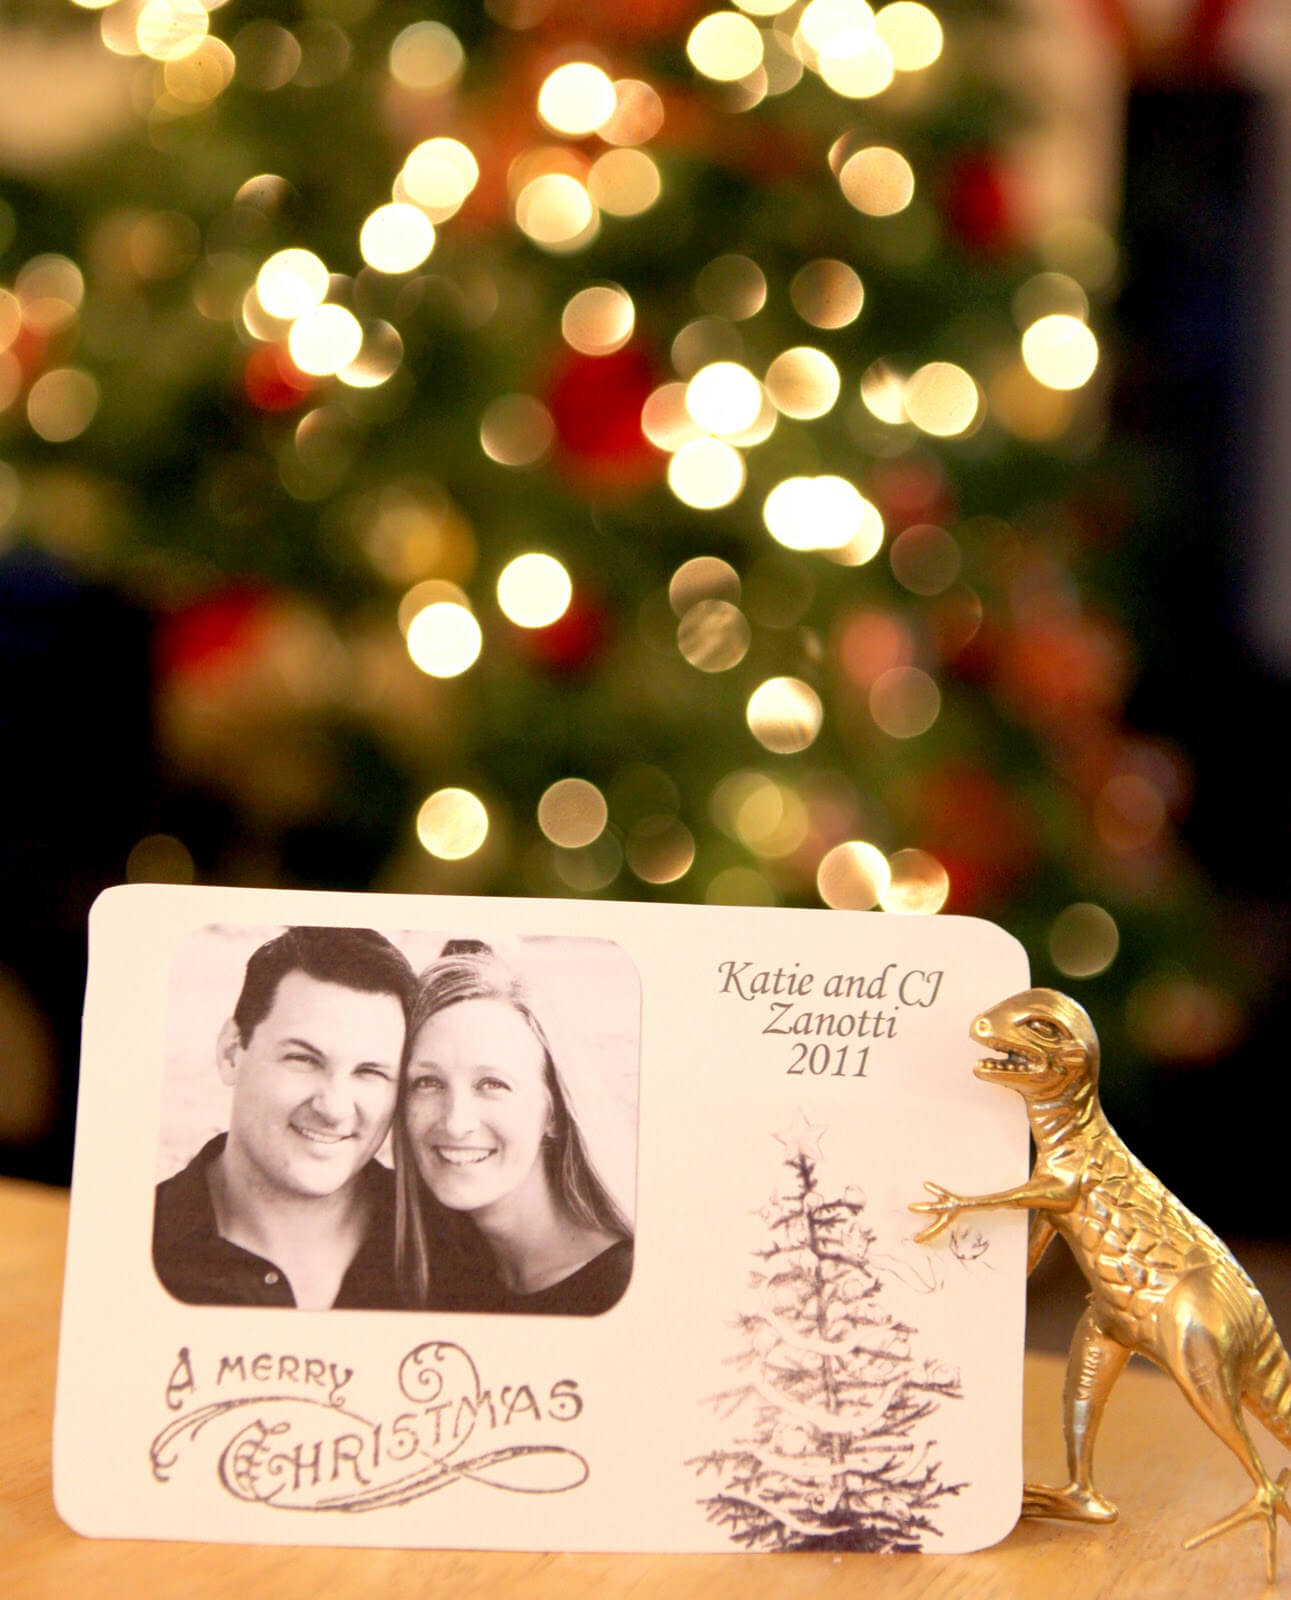 Chloe Moore Photography // The Blog: Free Christmas Card With Free Christmas Card Templates For Photographers